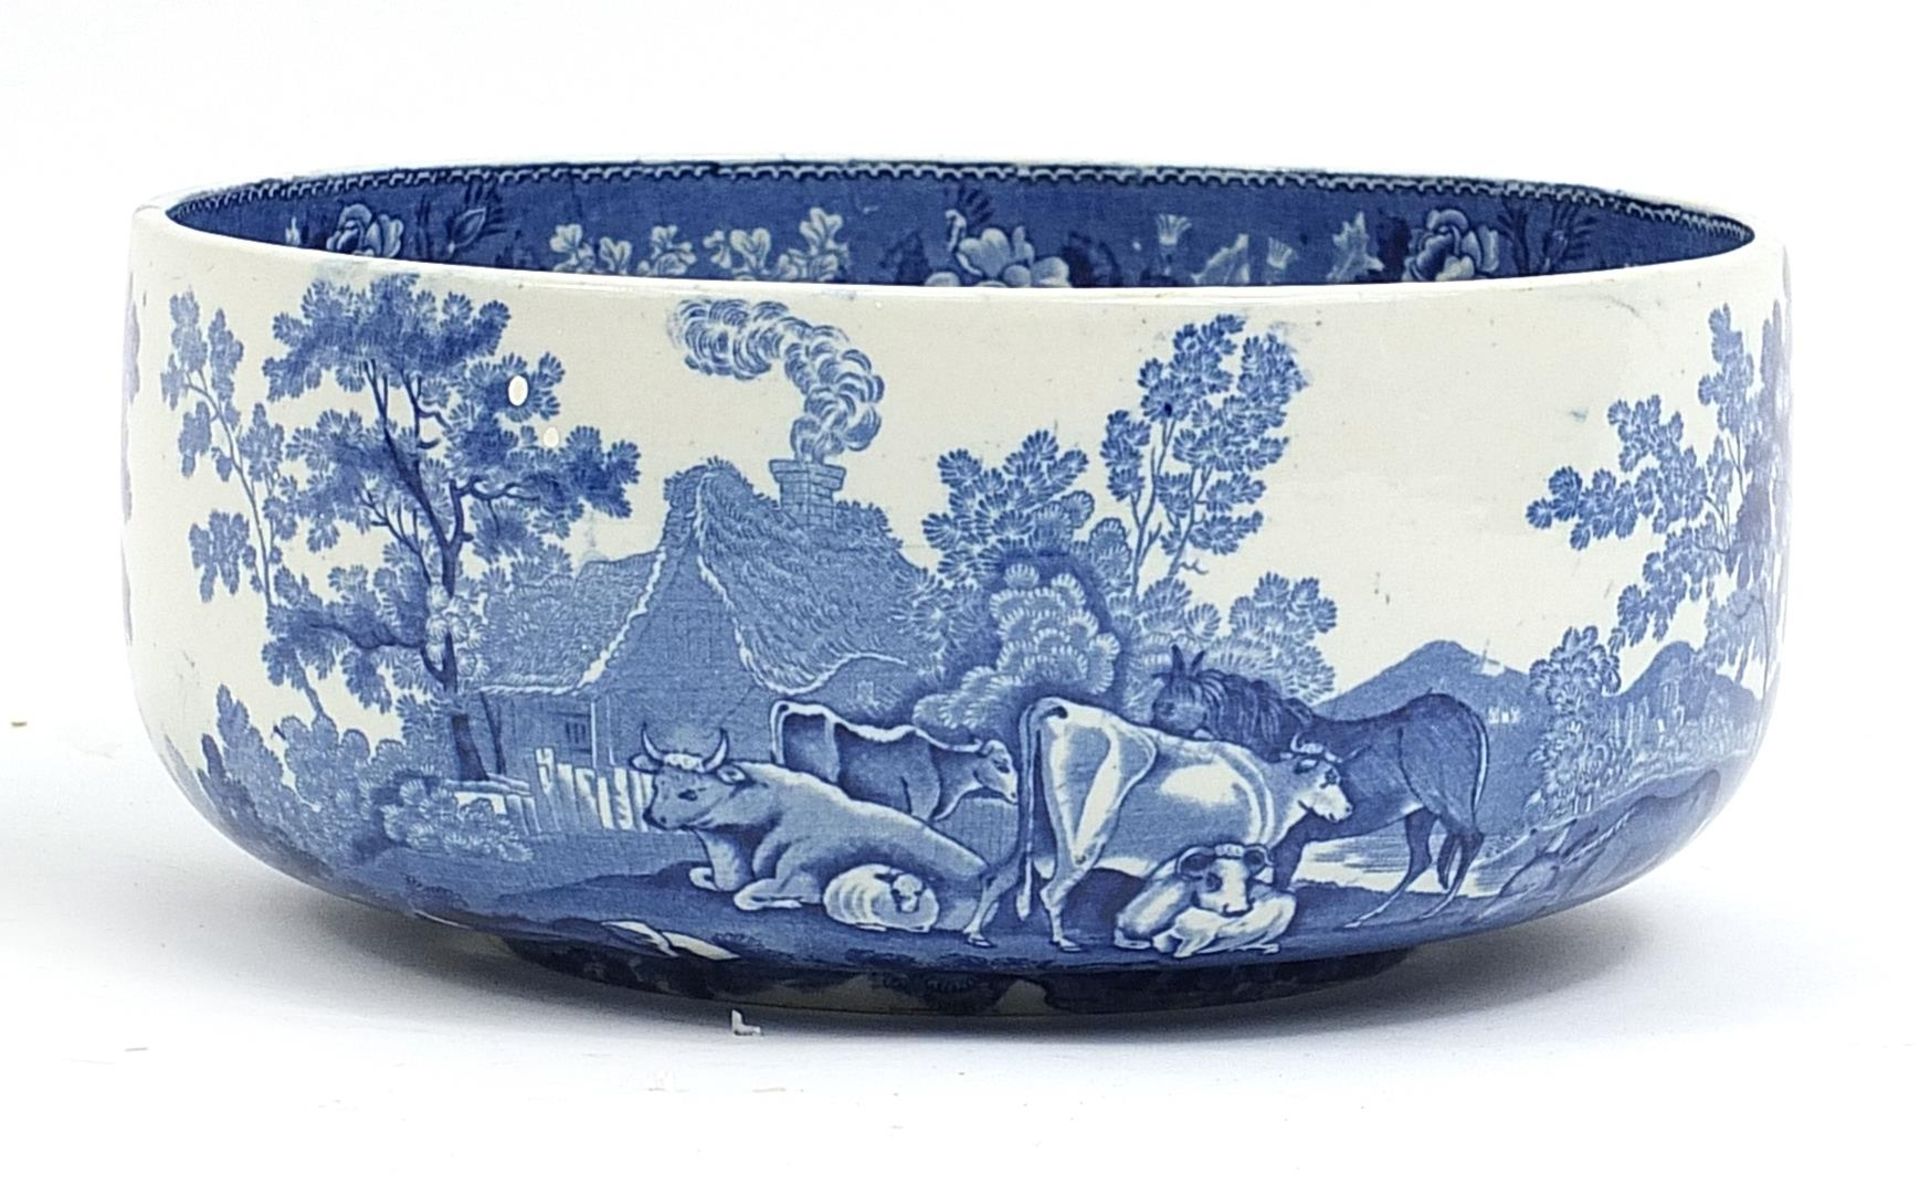 Adams pottery blue and white willow pattern fruit bowl, 24cm in diameter - Image 2 of 5